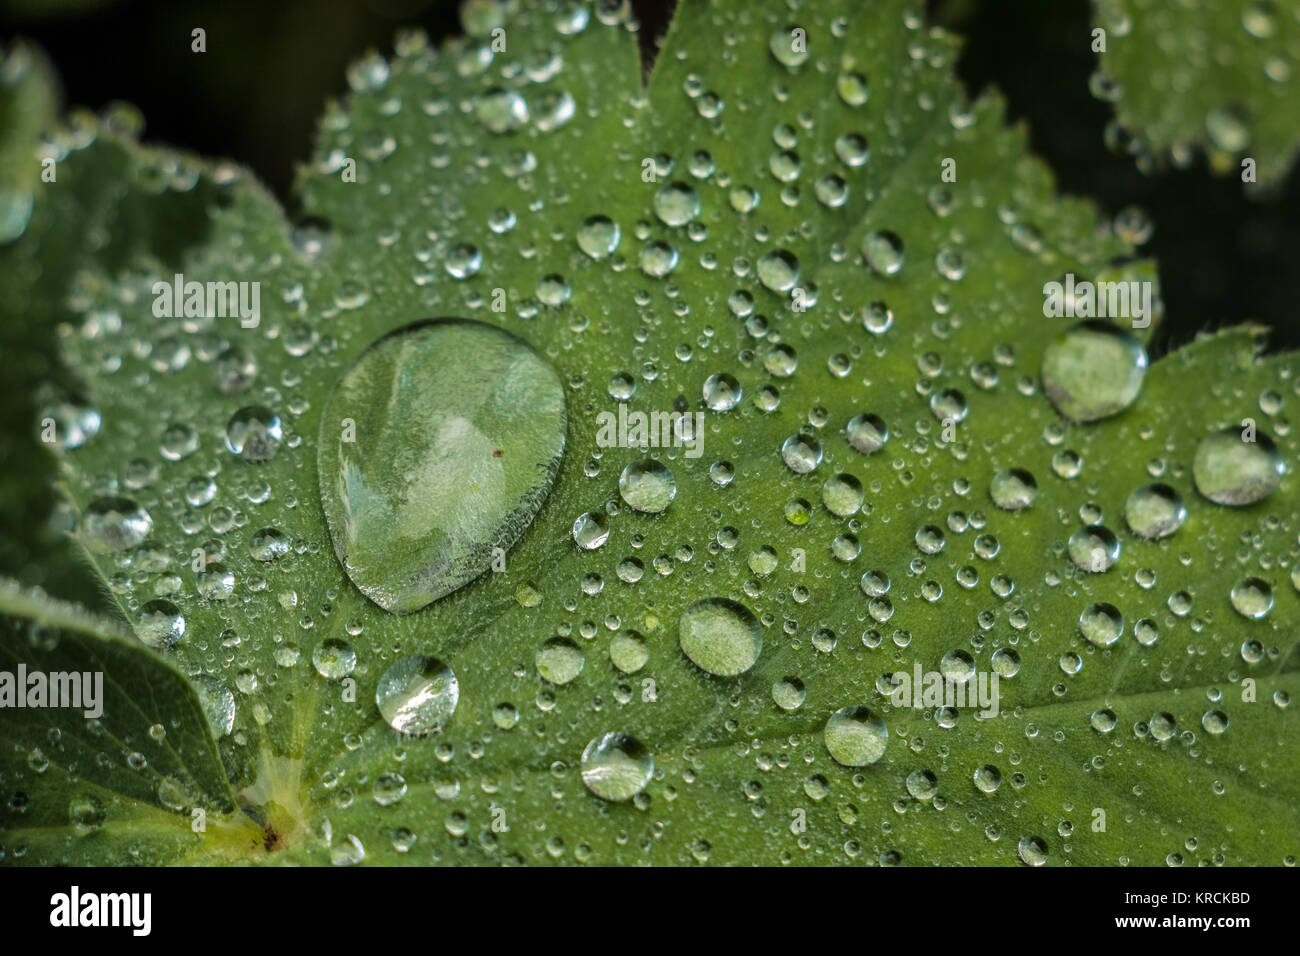 Water drops on a green leaf in the park Stock Photo